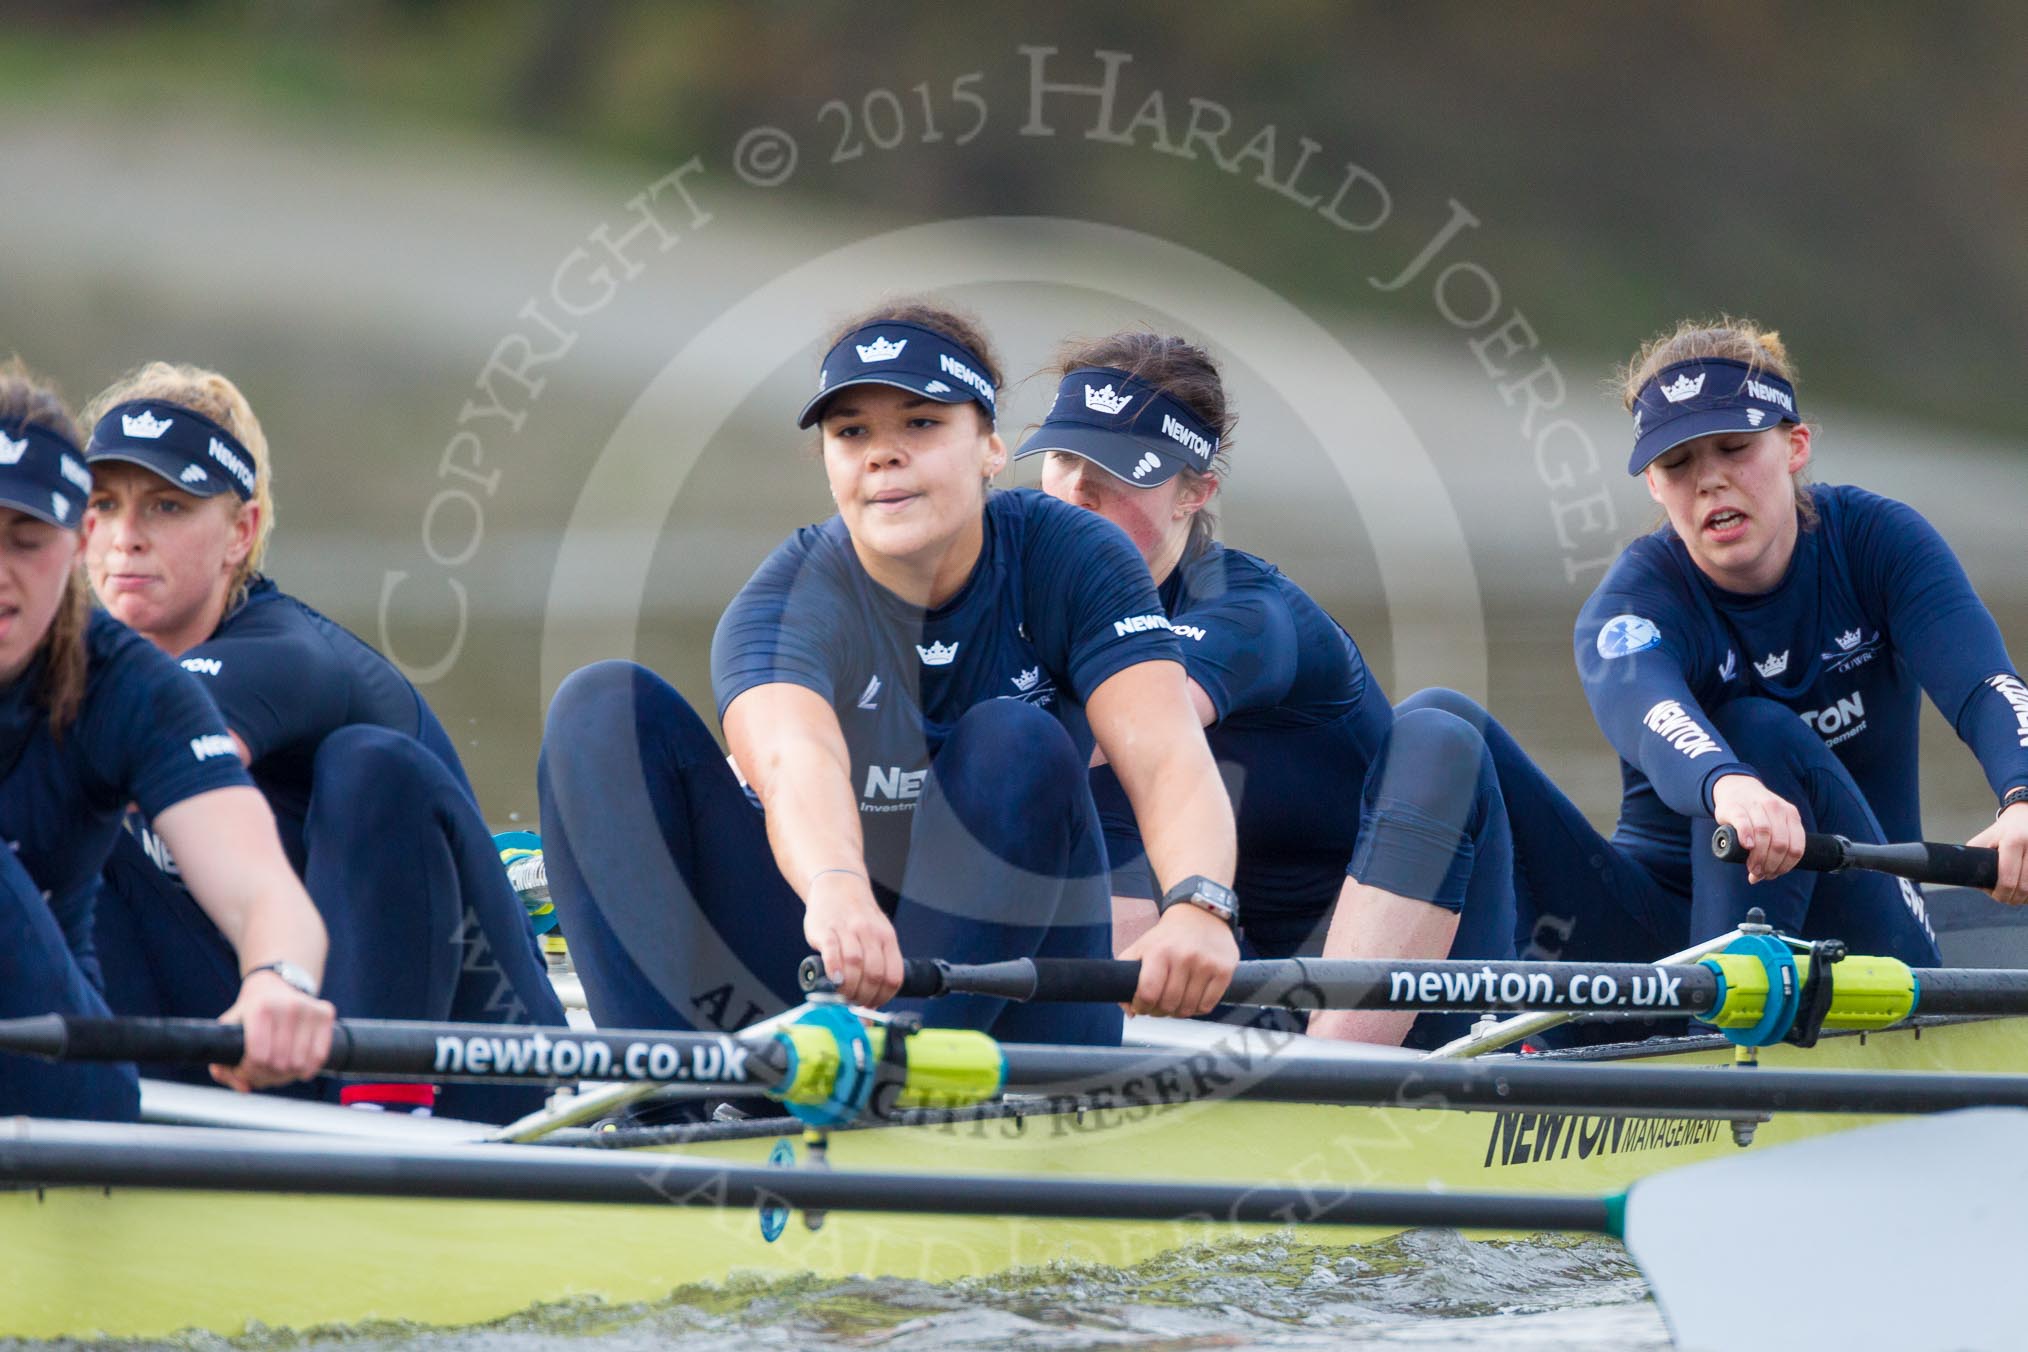 The Boat Race season 2016 - Women's Boat Race Trial Eights (OUWBC, Oxford): "Charybdis" , here 4-Emma Spruce, 3-Lara Pysden, 2-Christina Fleischer, bow-Georgie Daniell.
River Thames between Putney Bridge and Mortlake,
London SW15,

United Kingdom,
on 10 December 2015 at 12:26, image #220